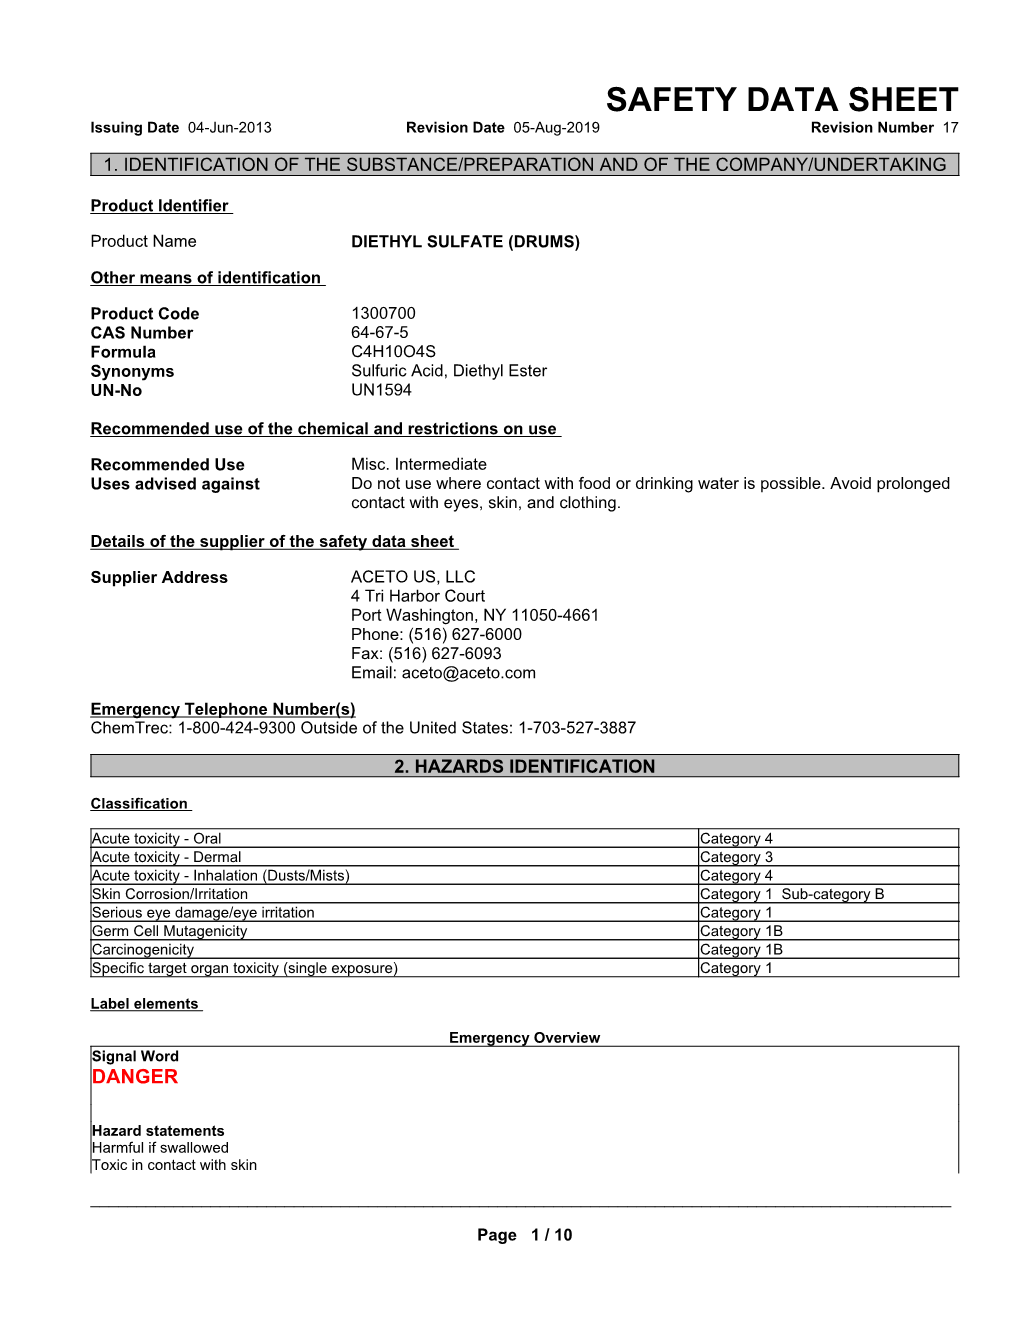 SAFETY DATA SHEET Issuing Date 04-Jun-2013 Revision Date 05-Aug-2019 Revision Number 17